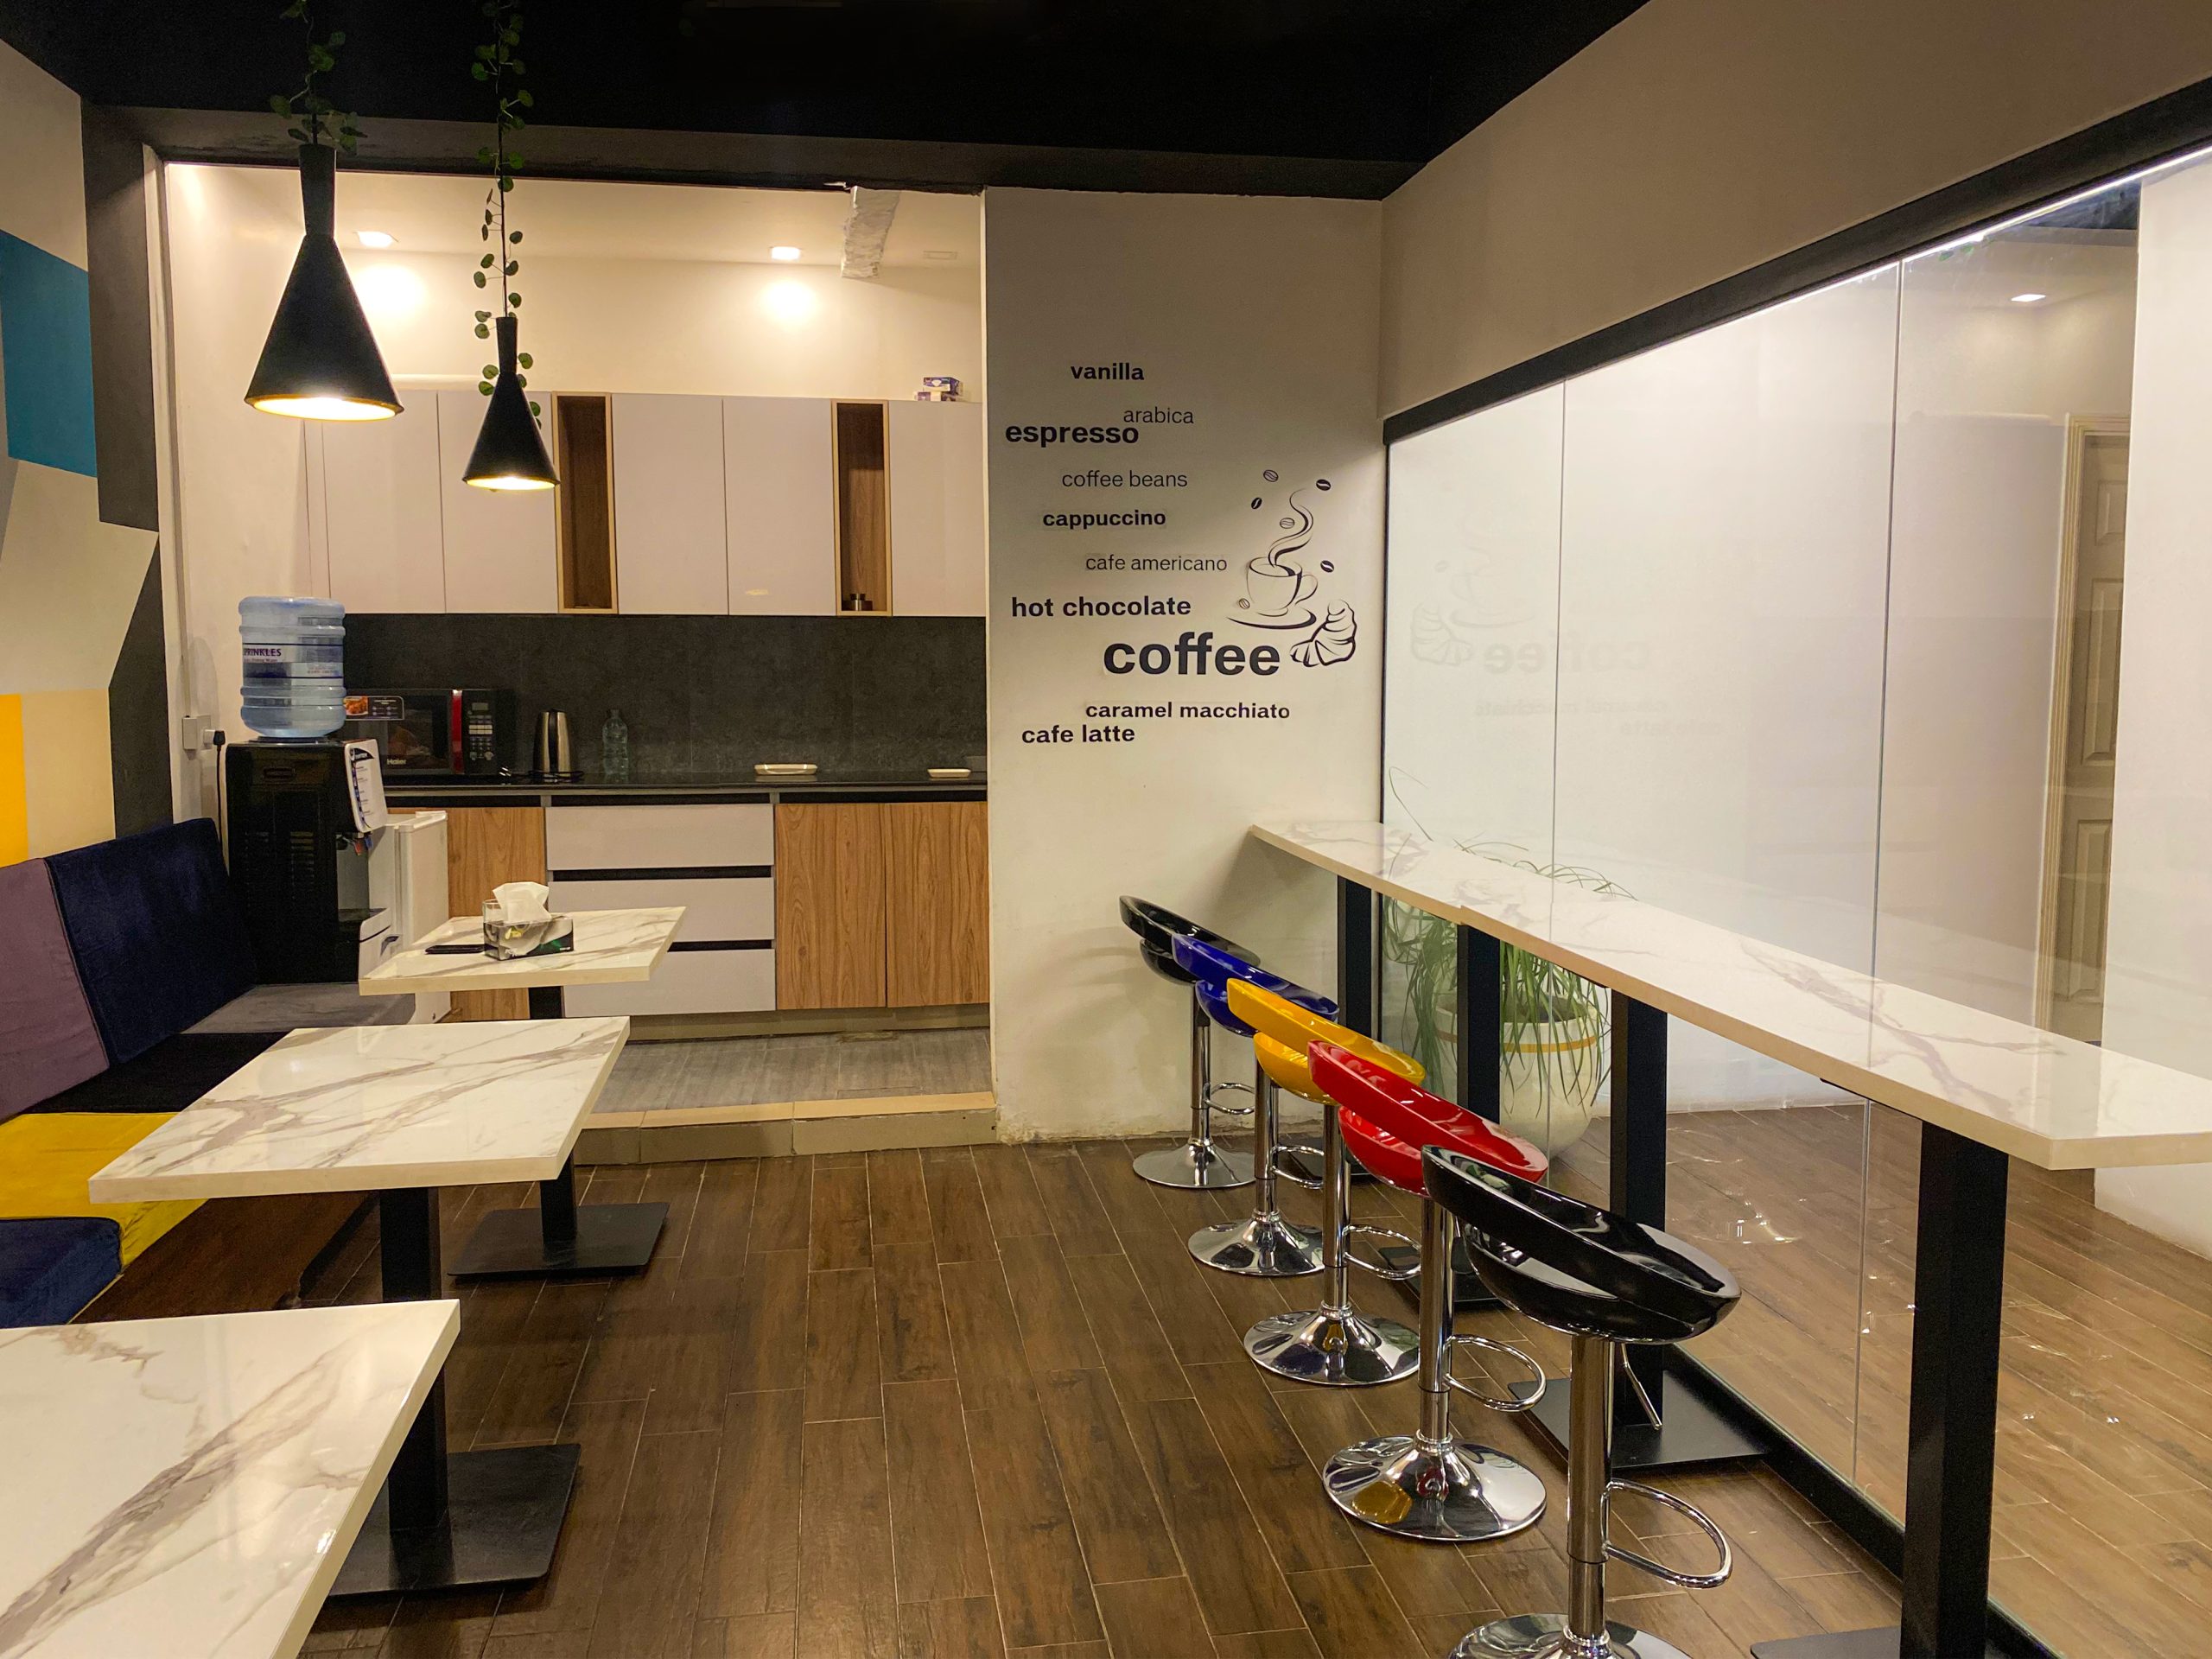 Sympl Energy Lahore office boasts a vibrant and modern cafeteria